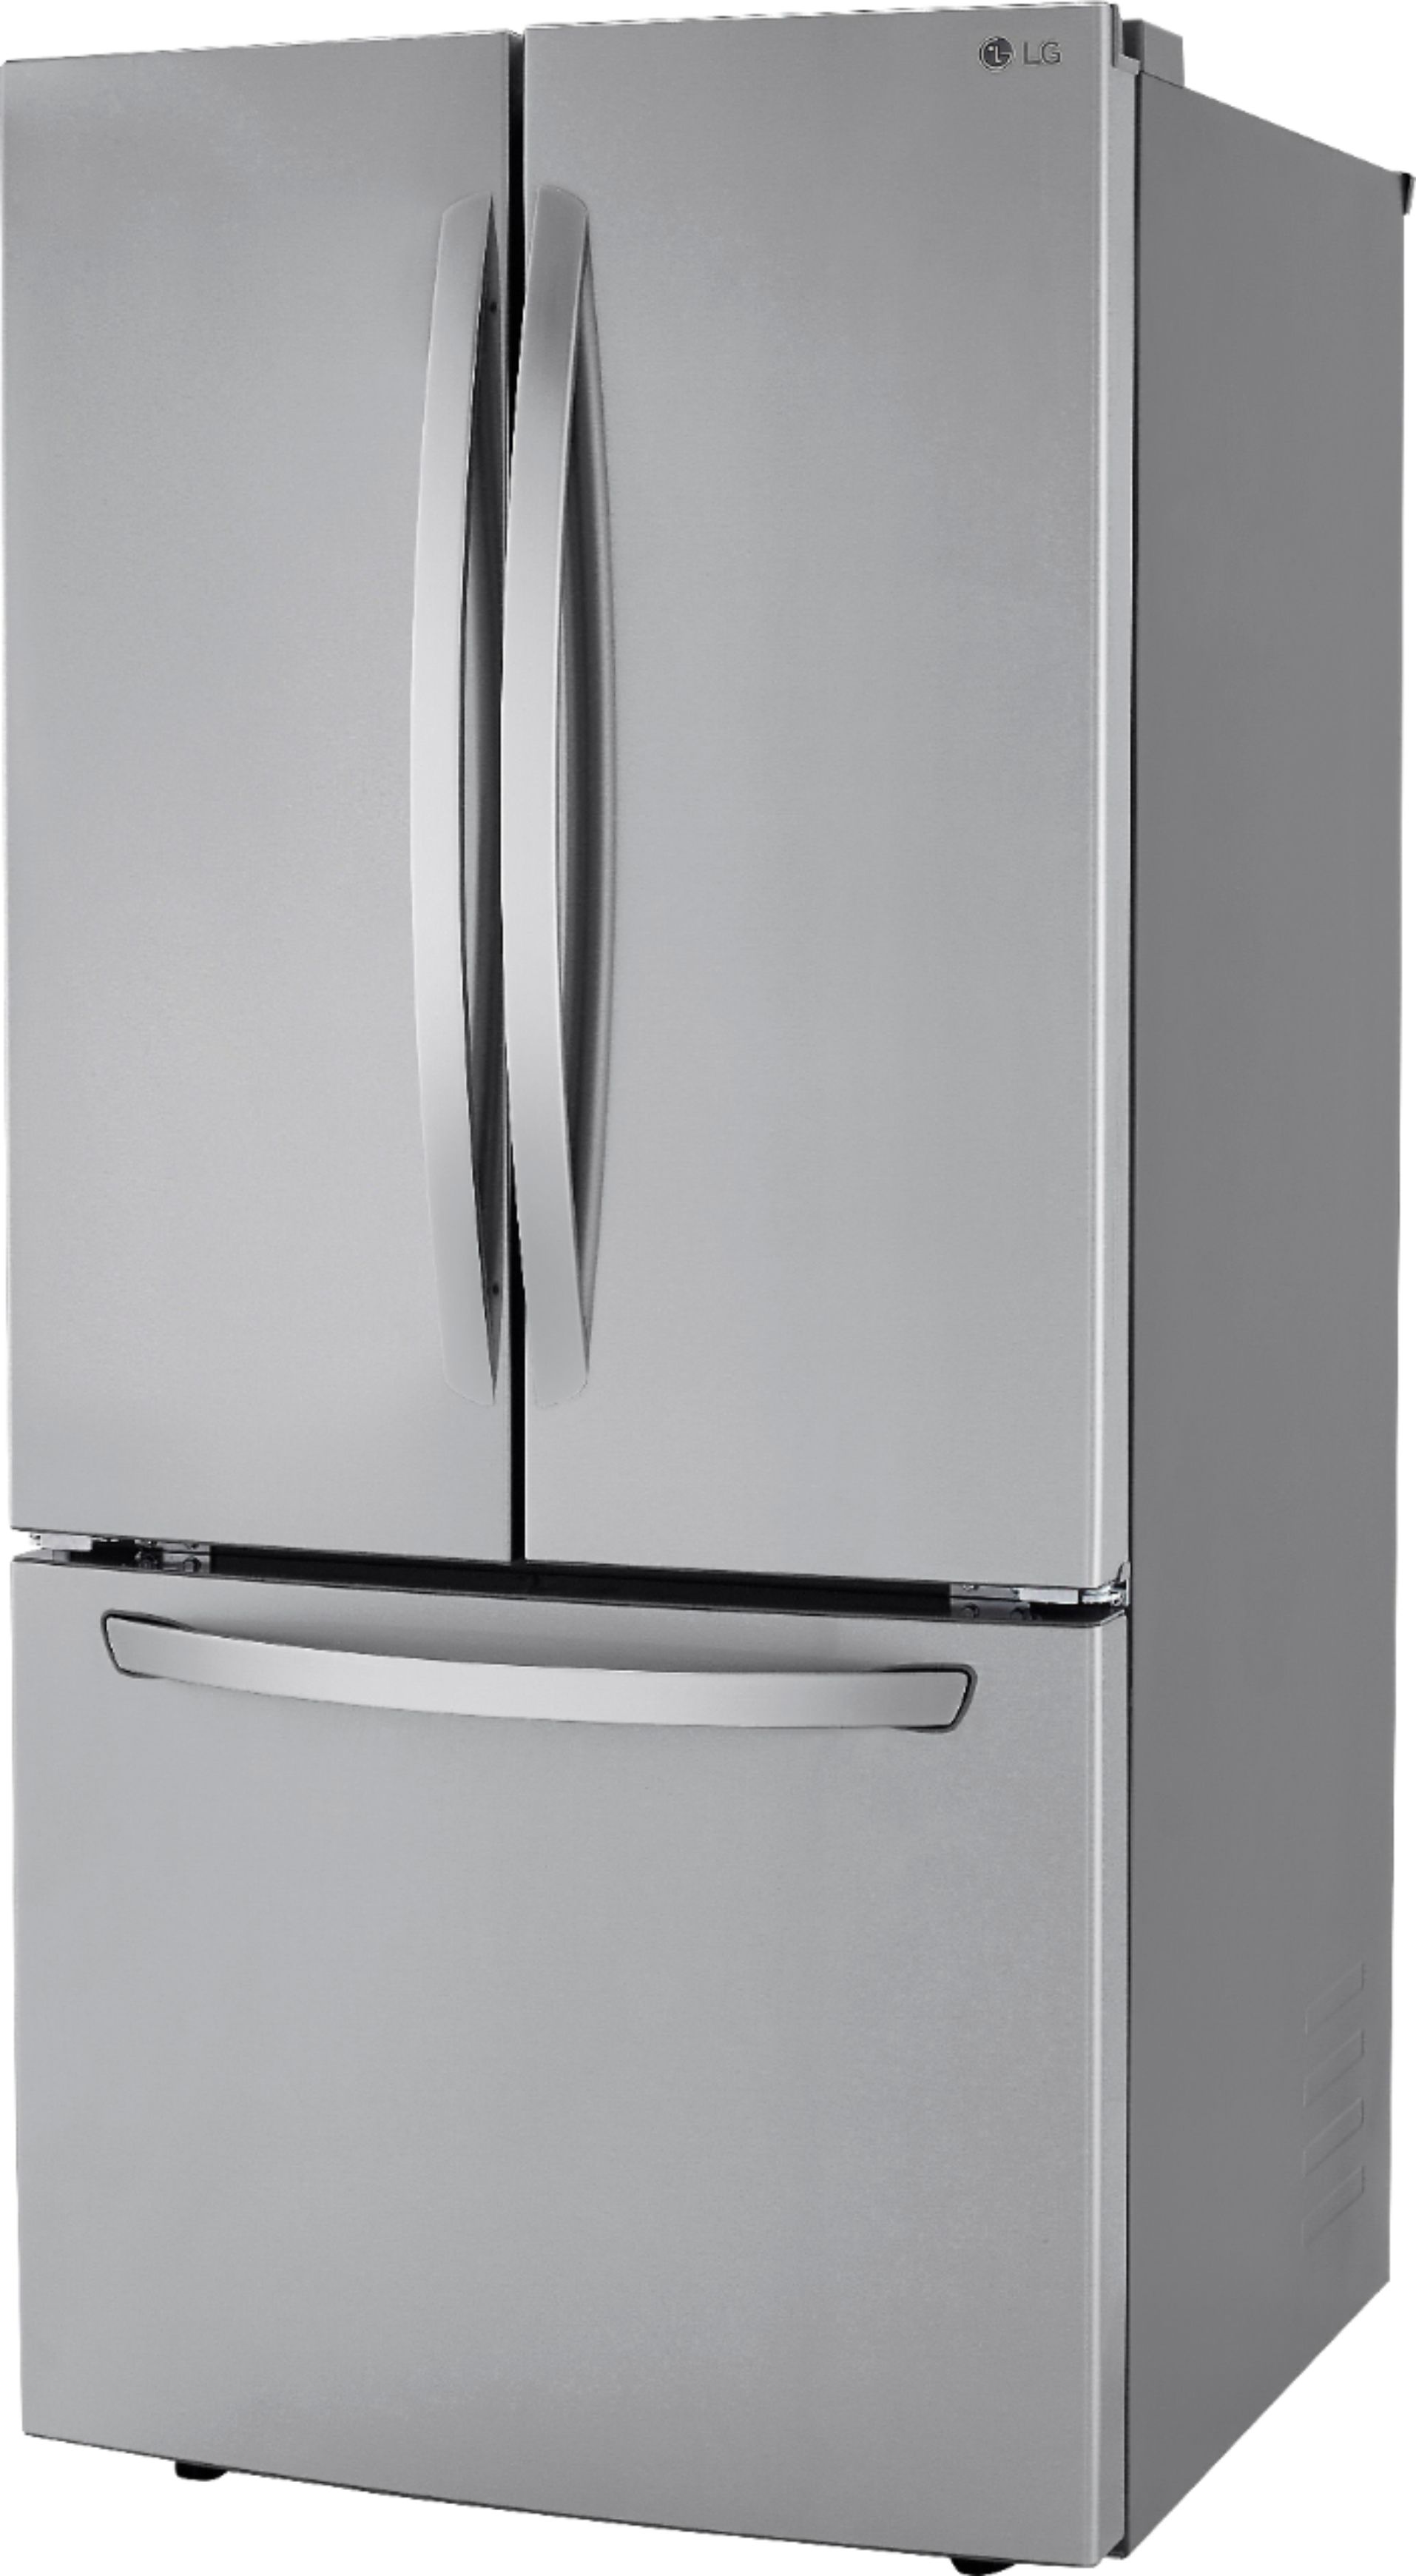 Left View: LG - 25.1 Cu. Ft. French Door Refrigerator - Stainless steel